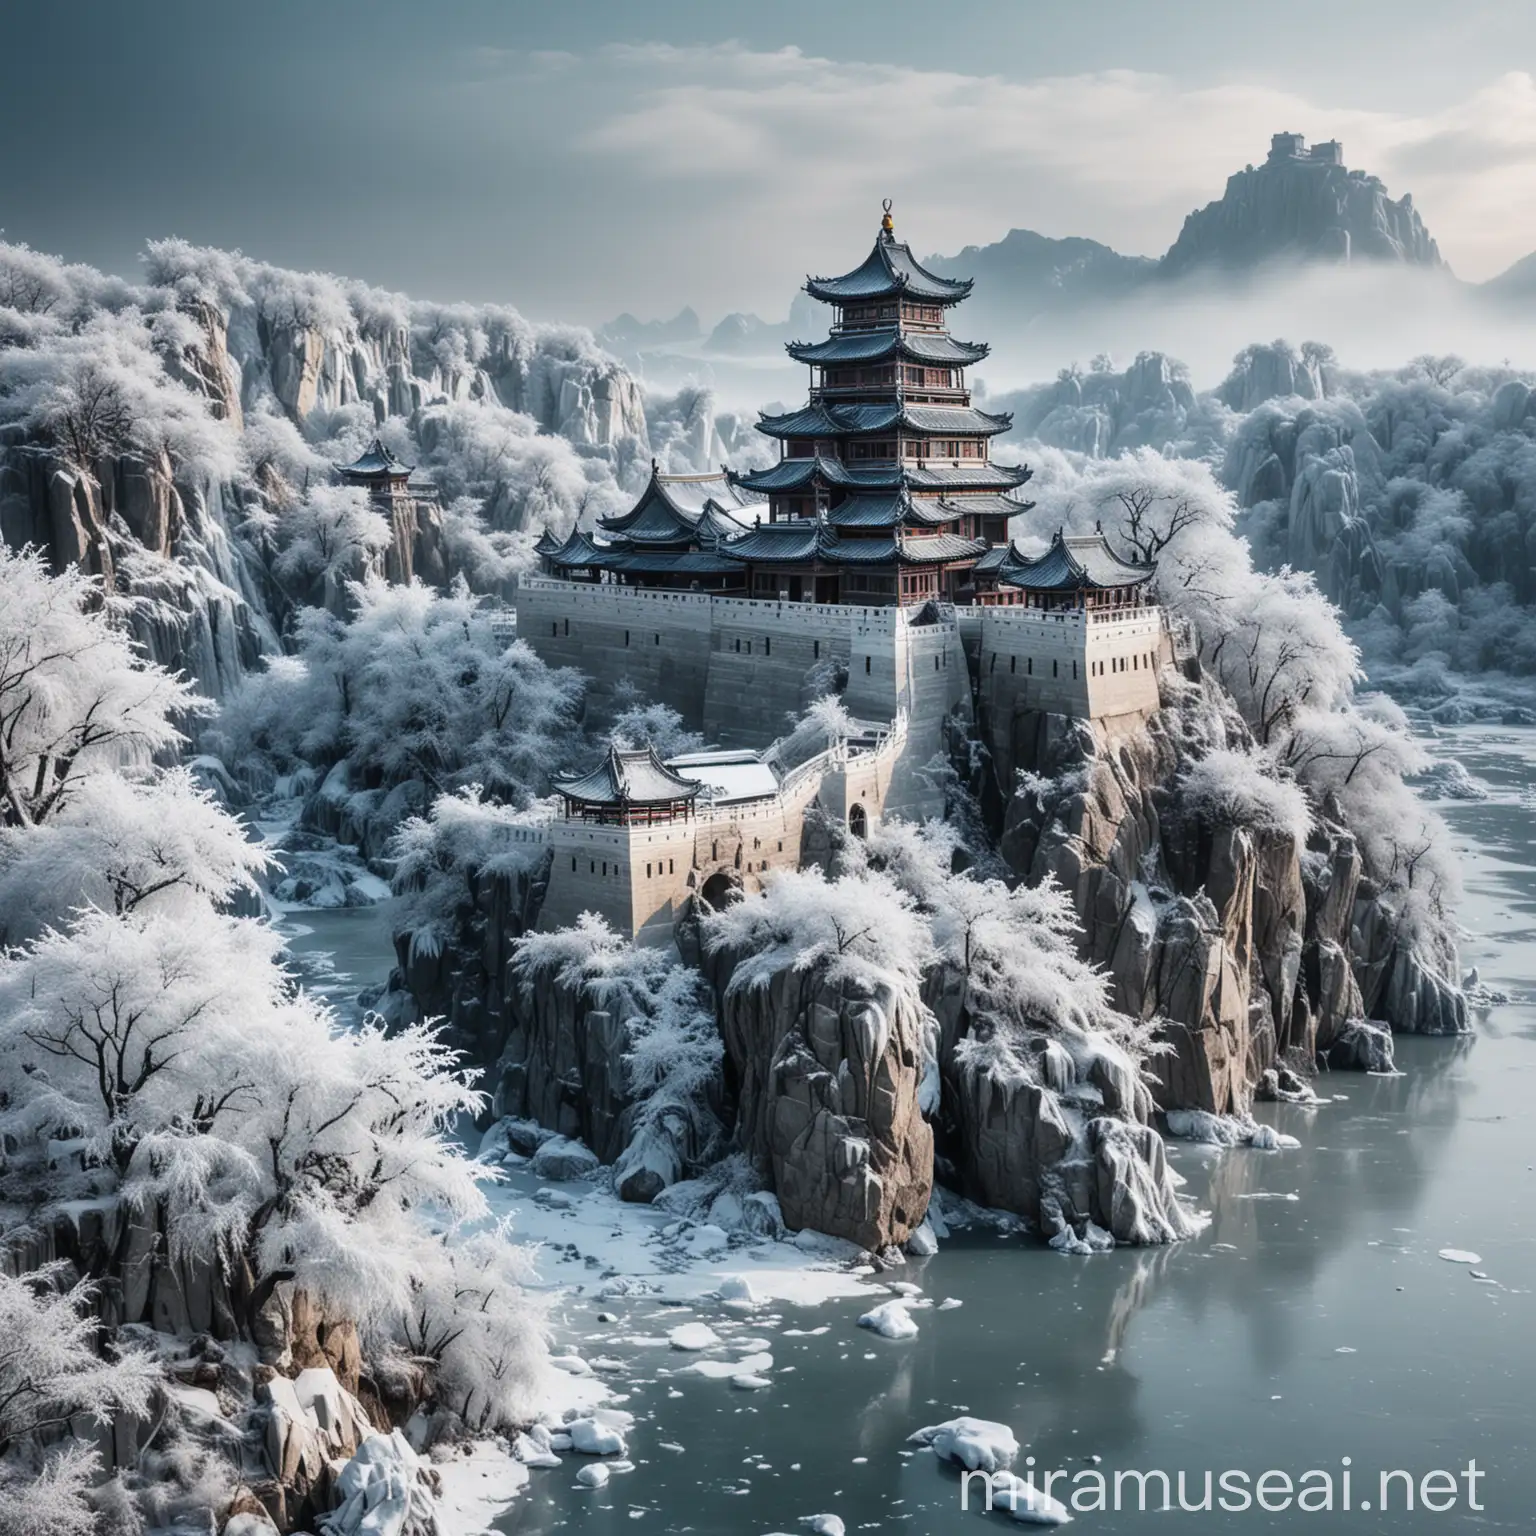 Chinese Castle in Ice Land with Trees